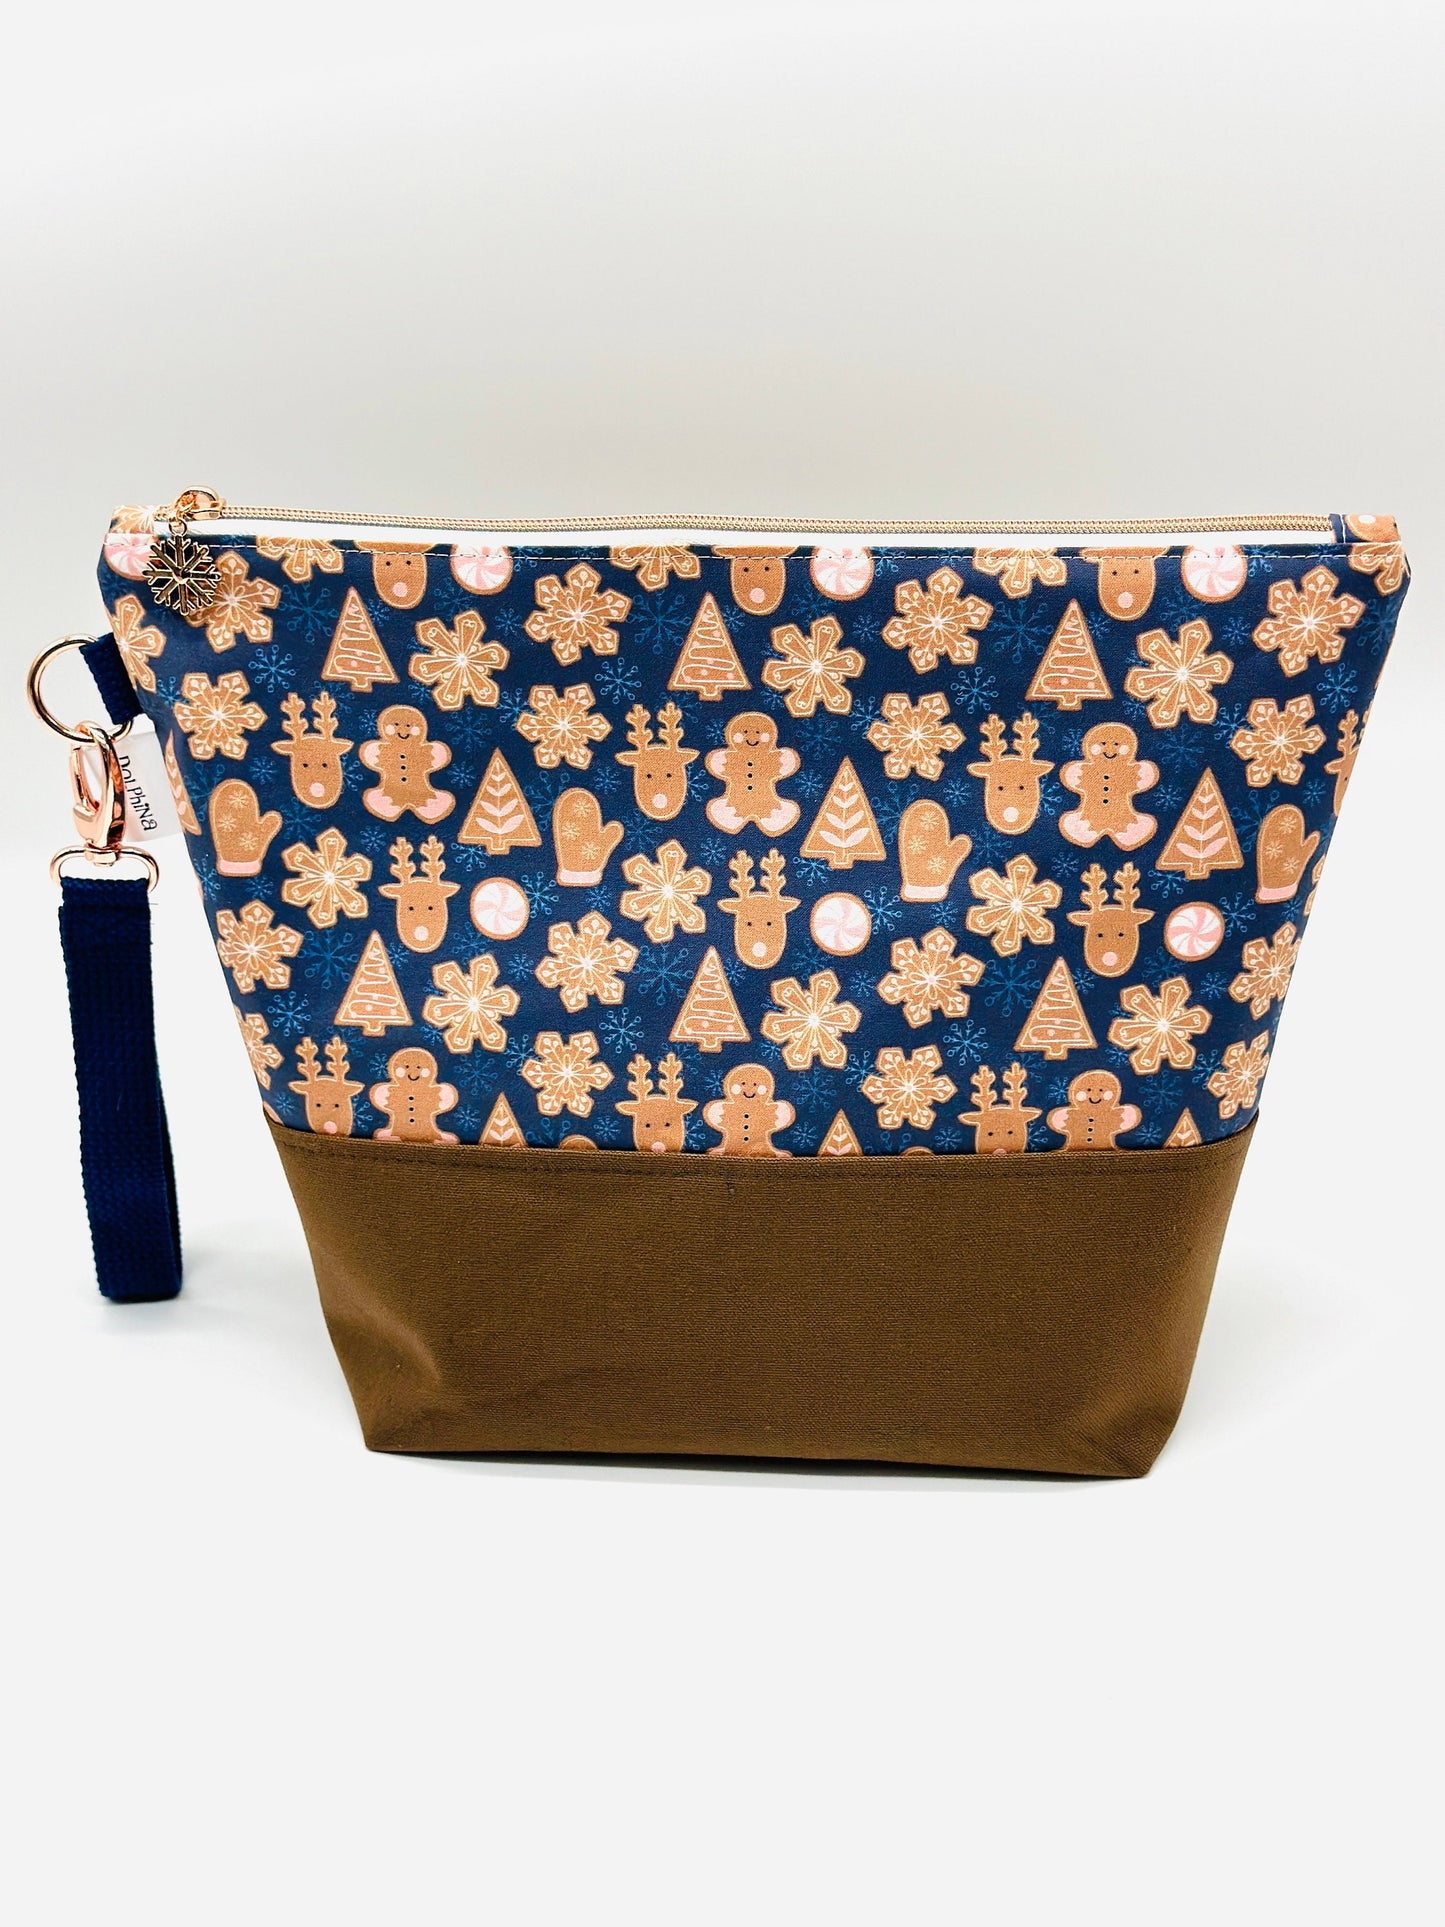 Extra large project bag - Gingerbread